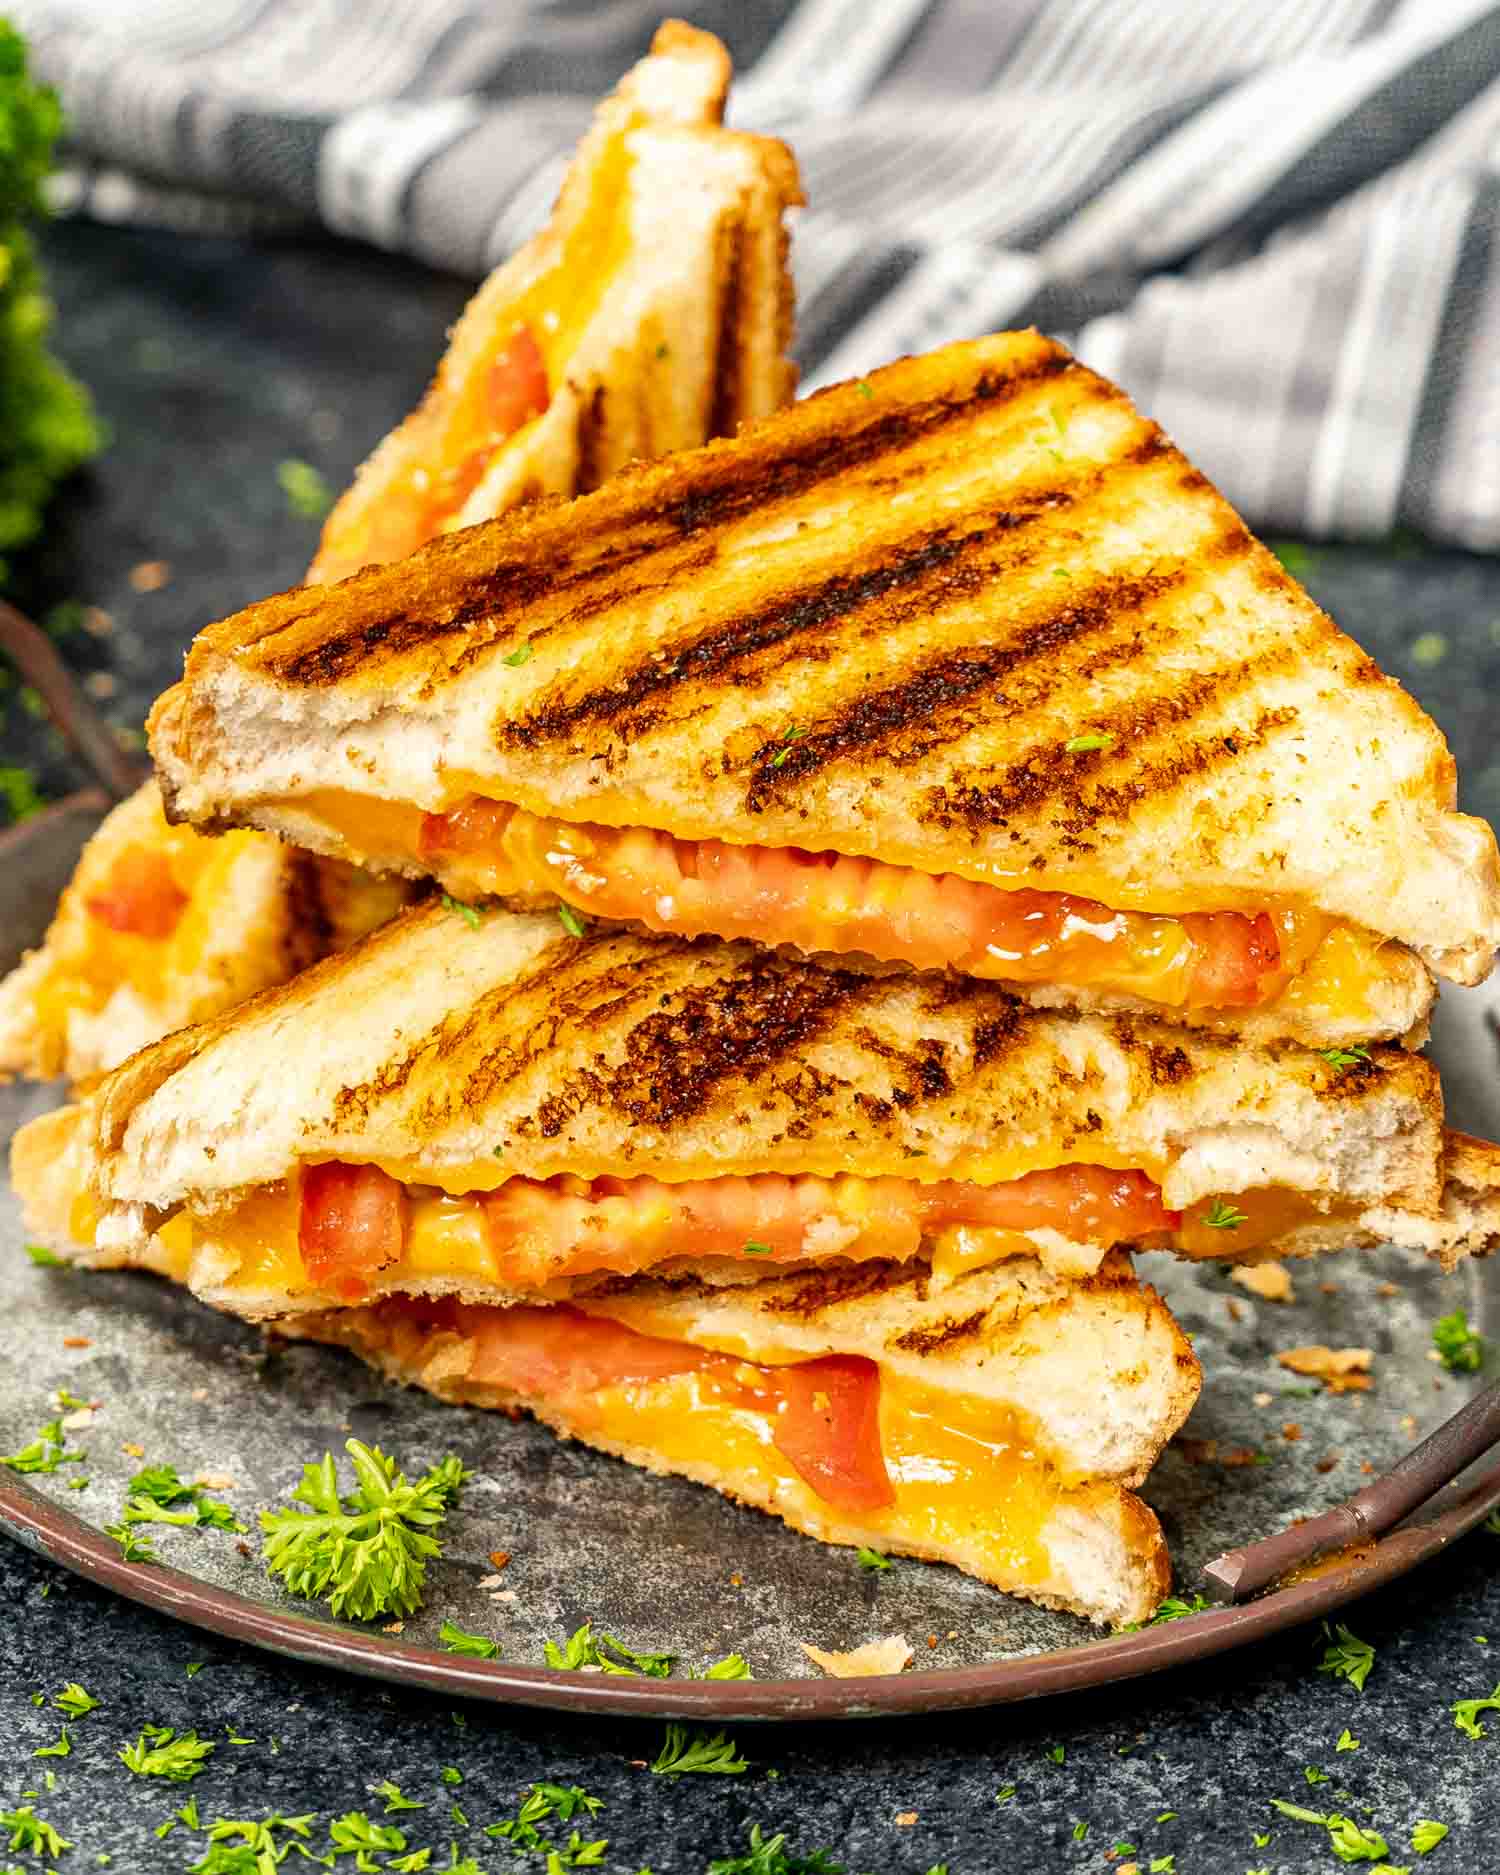 Easy Grilled Cheese - Craving Home Cooked